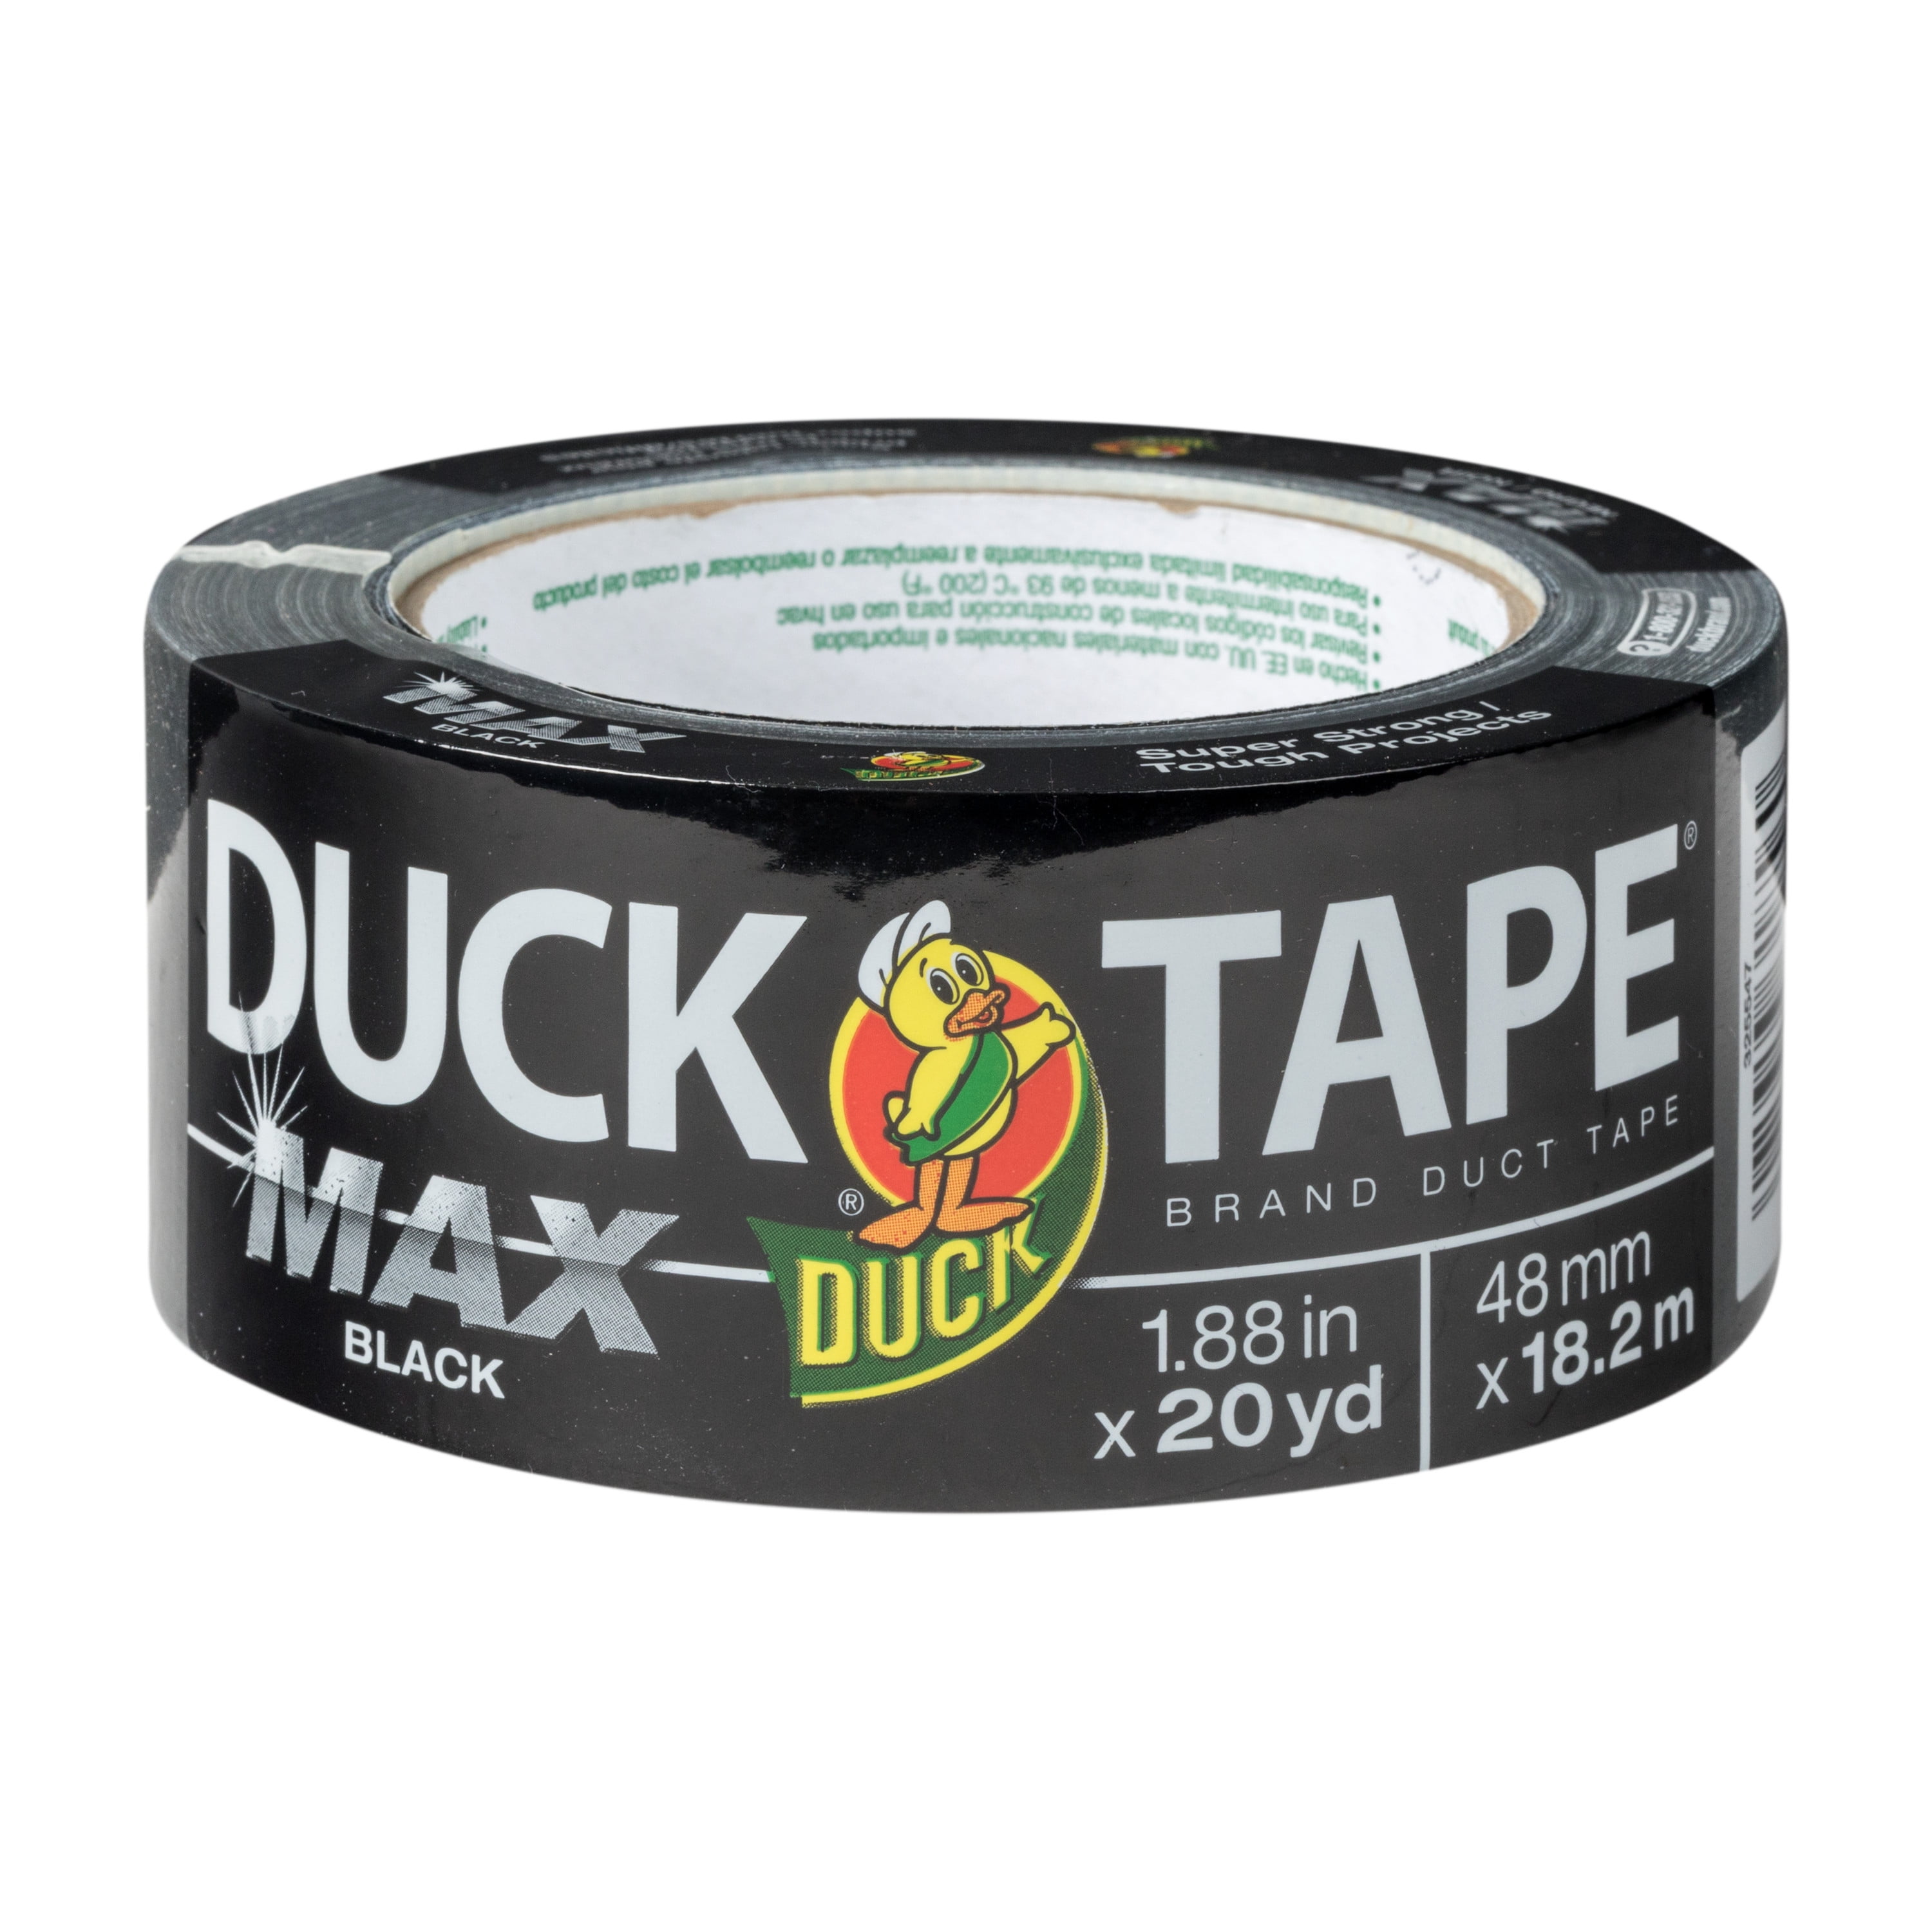 2 Rolls Black Duct Tape Premium Quality Water Resistant AMERICAN MADE 